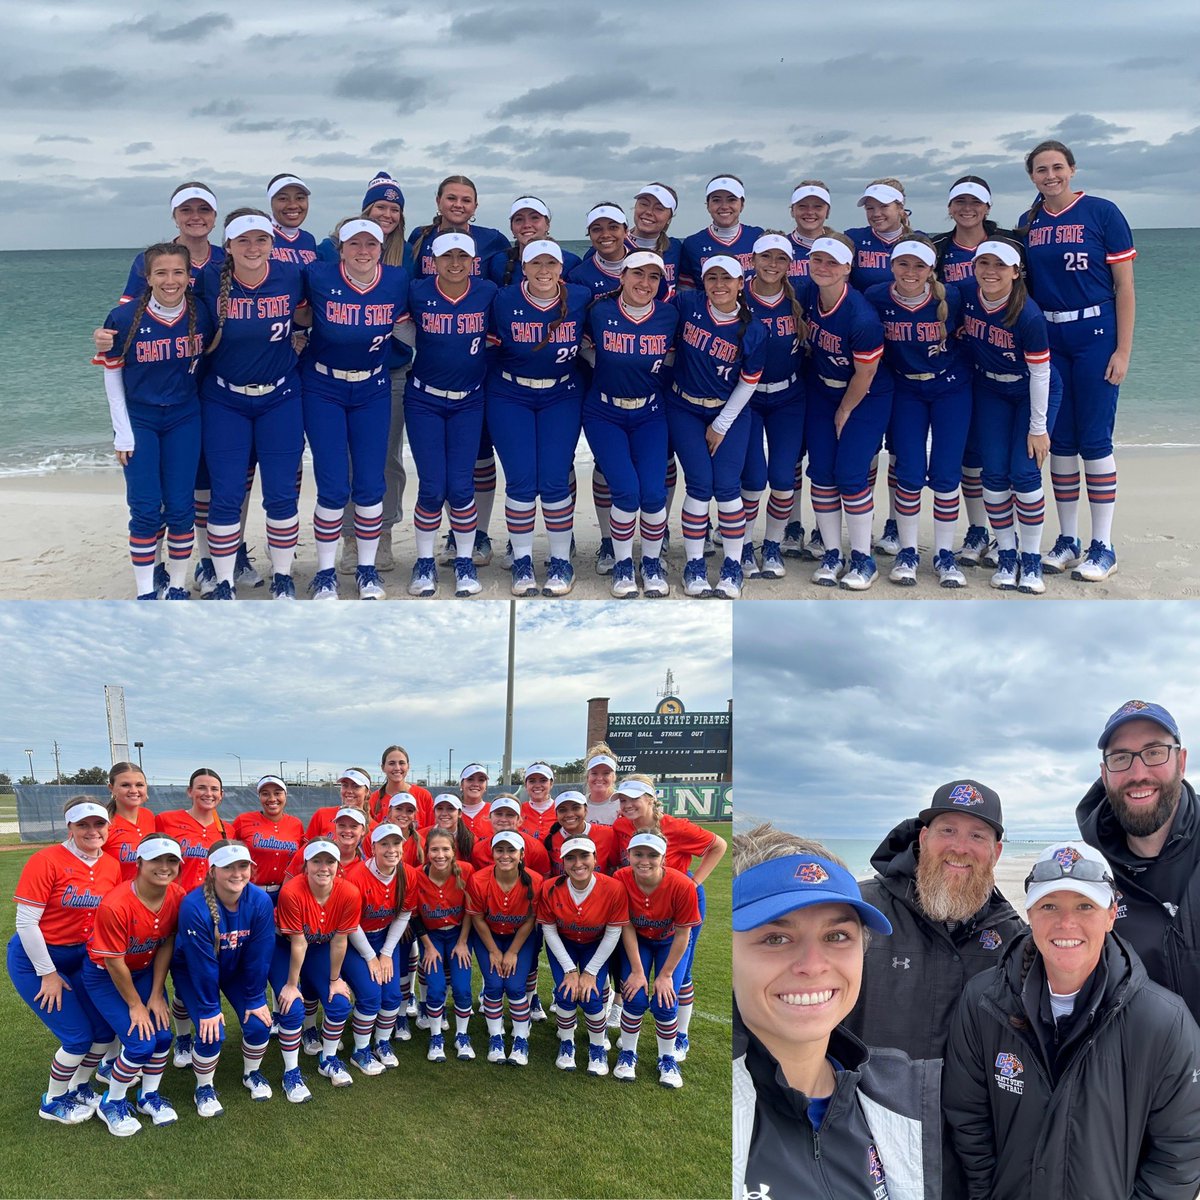 Tigers open up the season going 2-1 in Pensacola/Gulf Shores. Todays games were canceled. Yesterday, hitters combined for 28 hits // J. Cord threw a no hitter in her first appearance & E. Marks had an impressive 11 K performance in her 1st collegiate start!